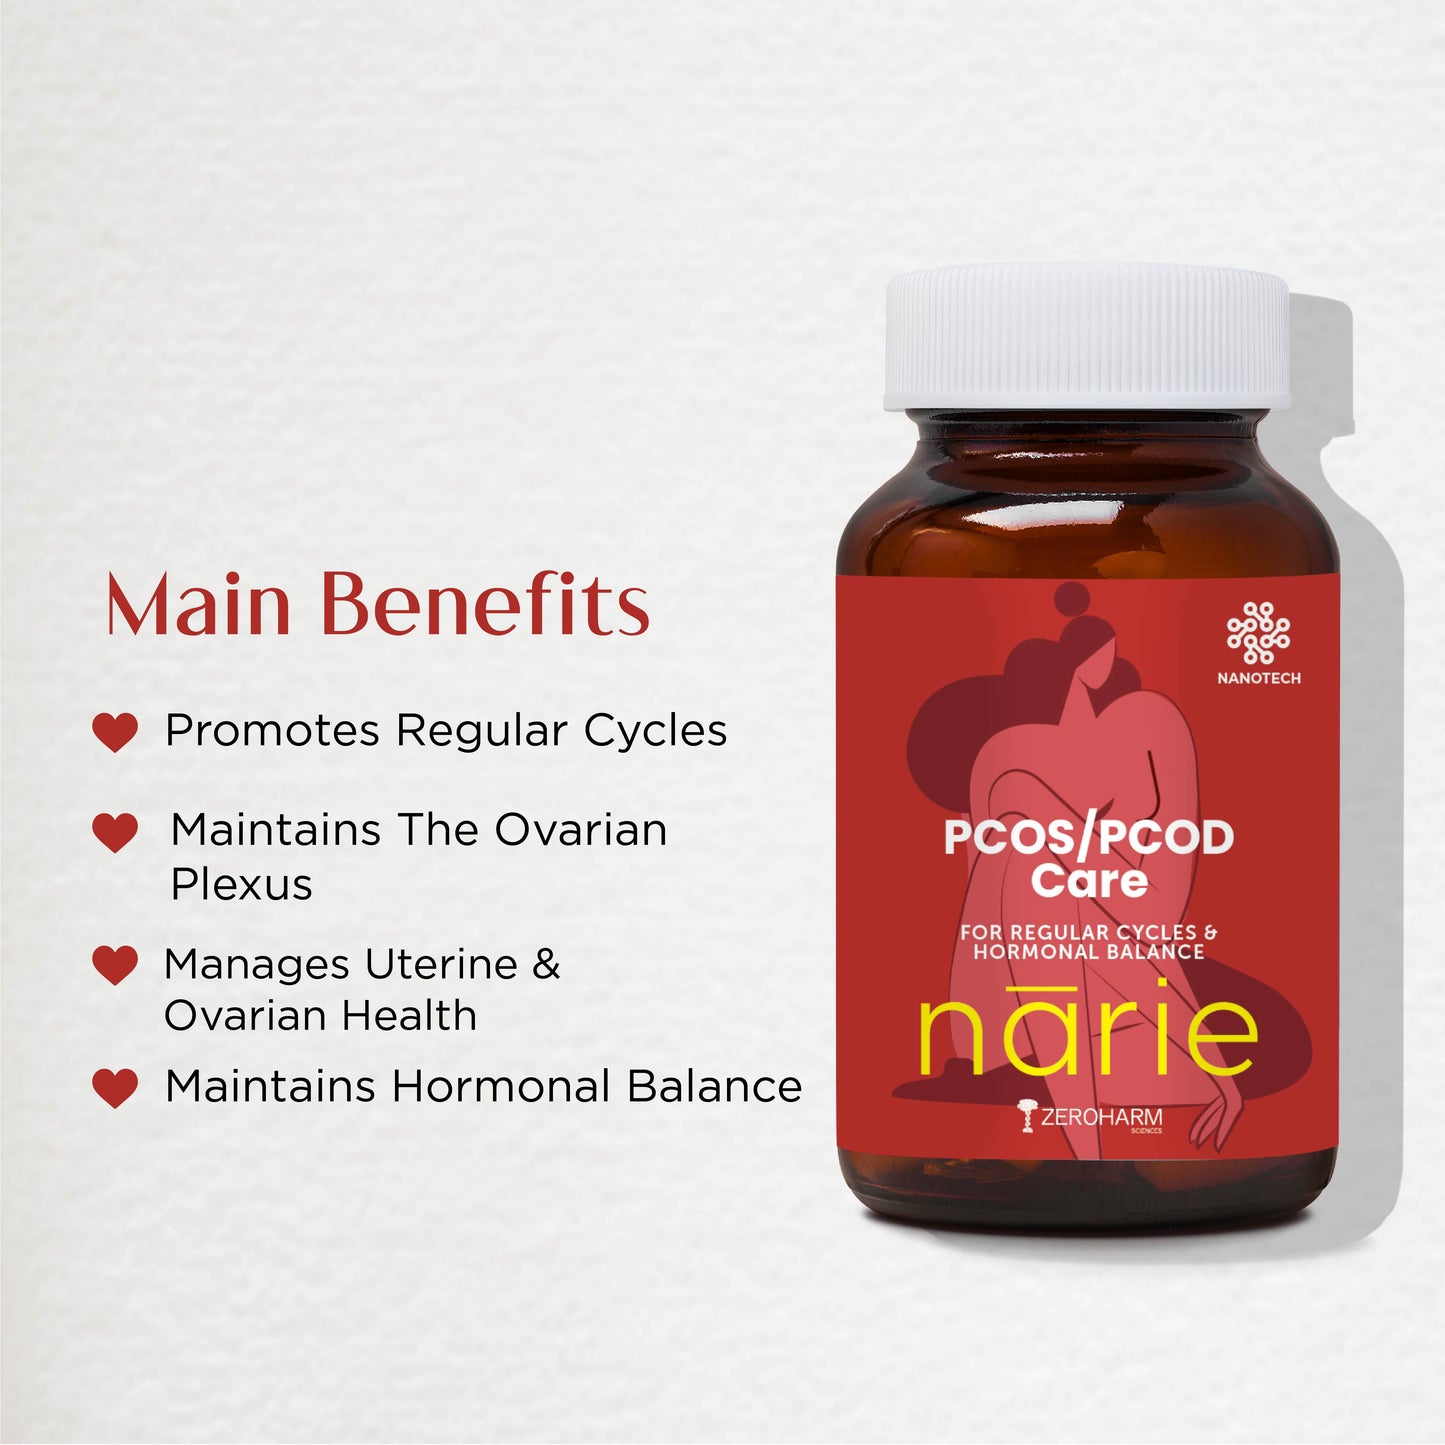 Narie PCOS & PCOD Care Tablets